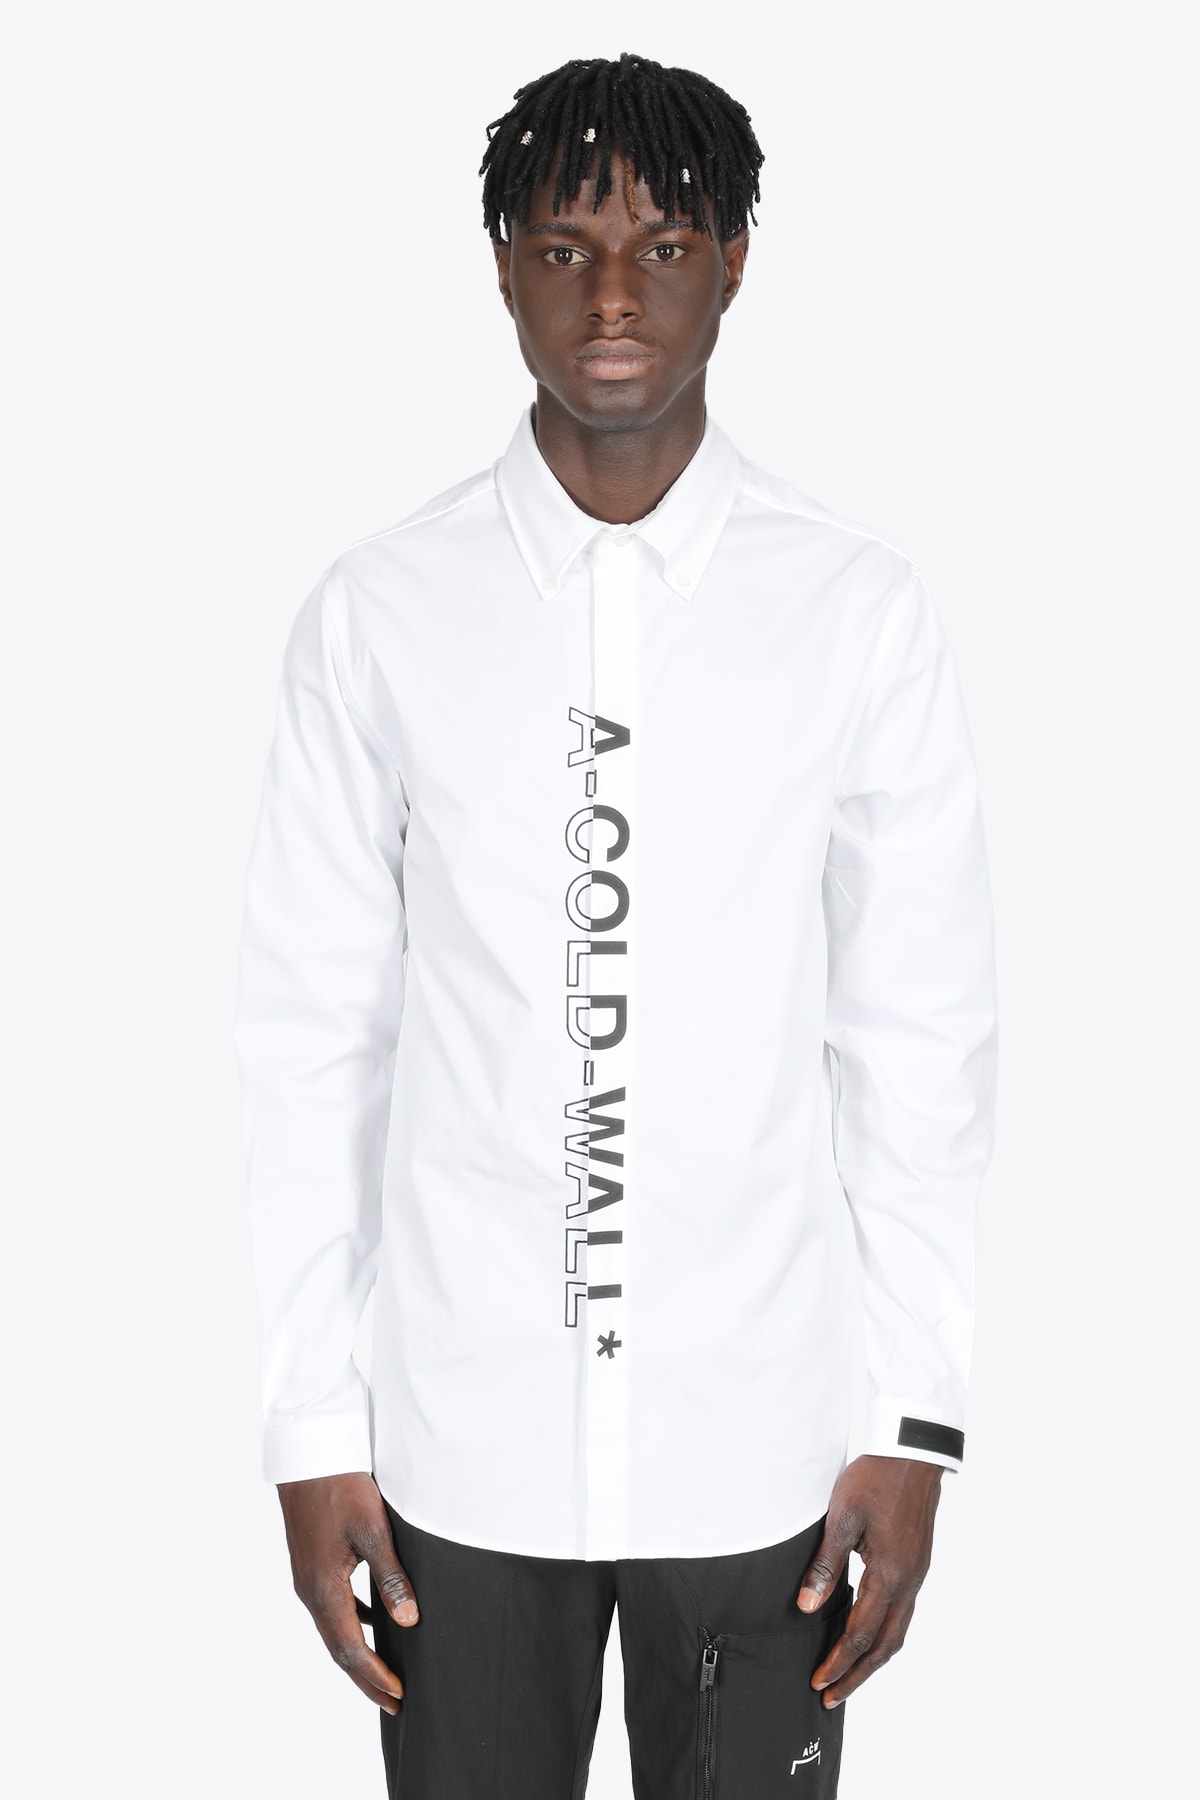 A-COLD-WALL Logo Branded Shirt White cotton shirt with front logo embroidery